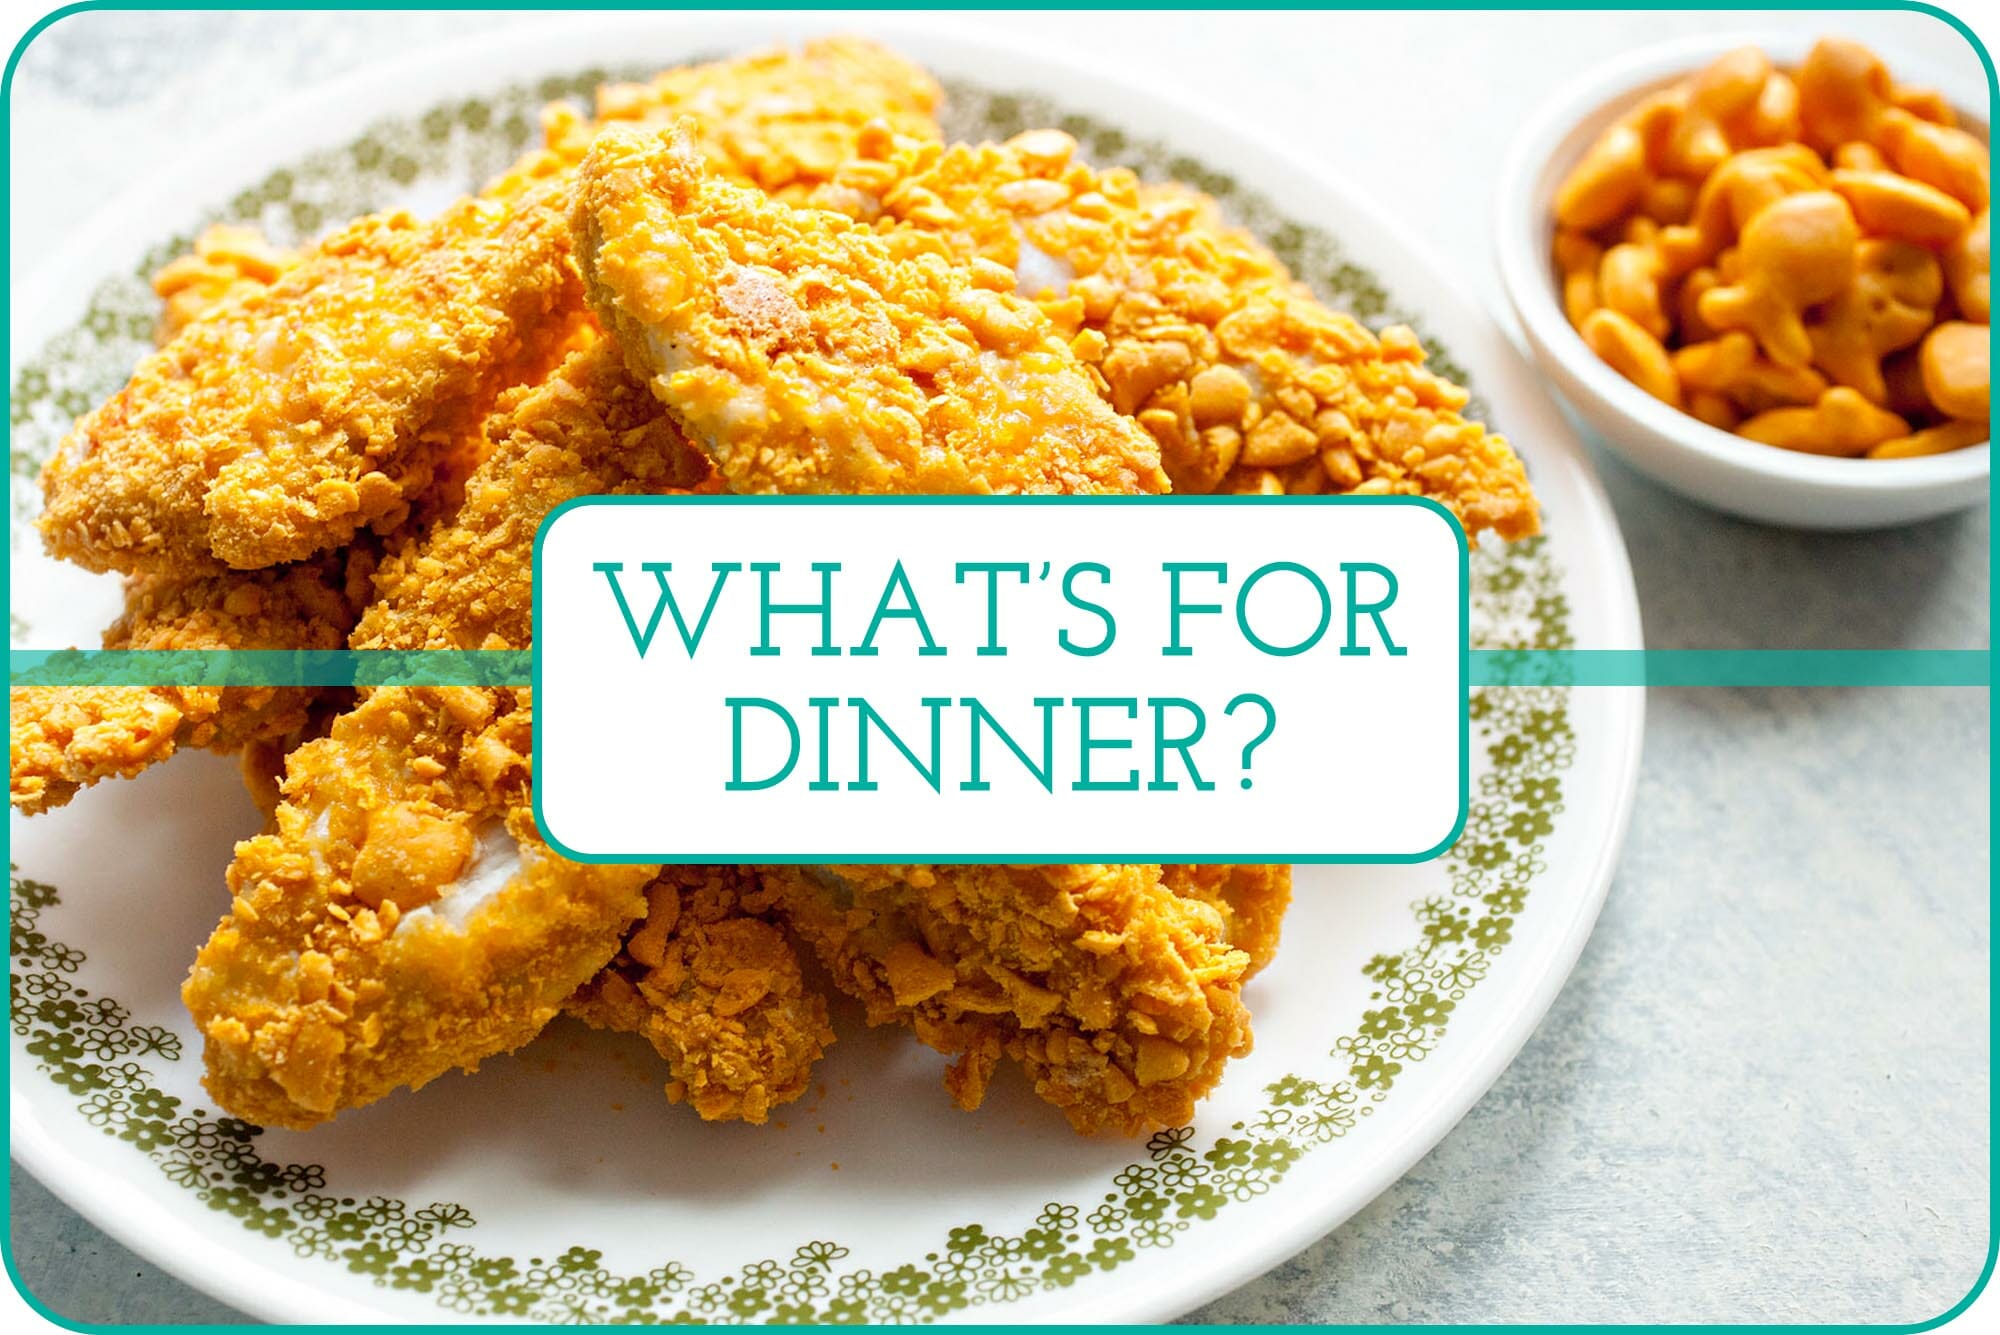 "What's For Dinner" with Goldfish Chicken Tenders on a plate and set behind the caption.